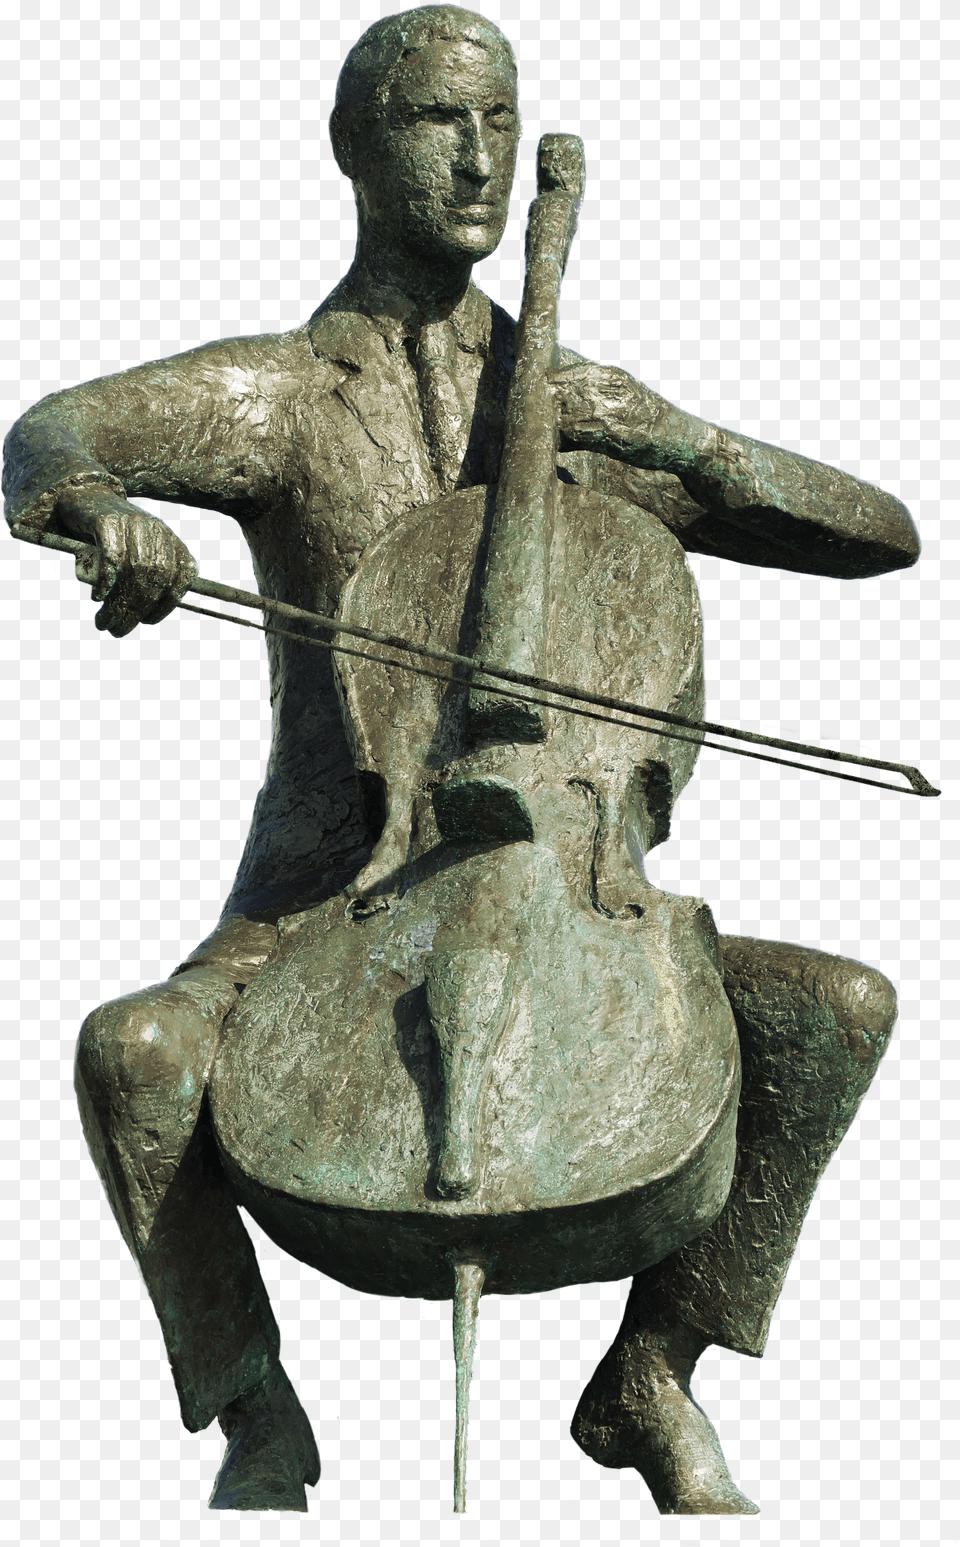 Cello Image Cello Statue, Nature, Night, Outdoors Png